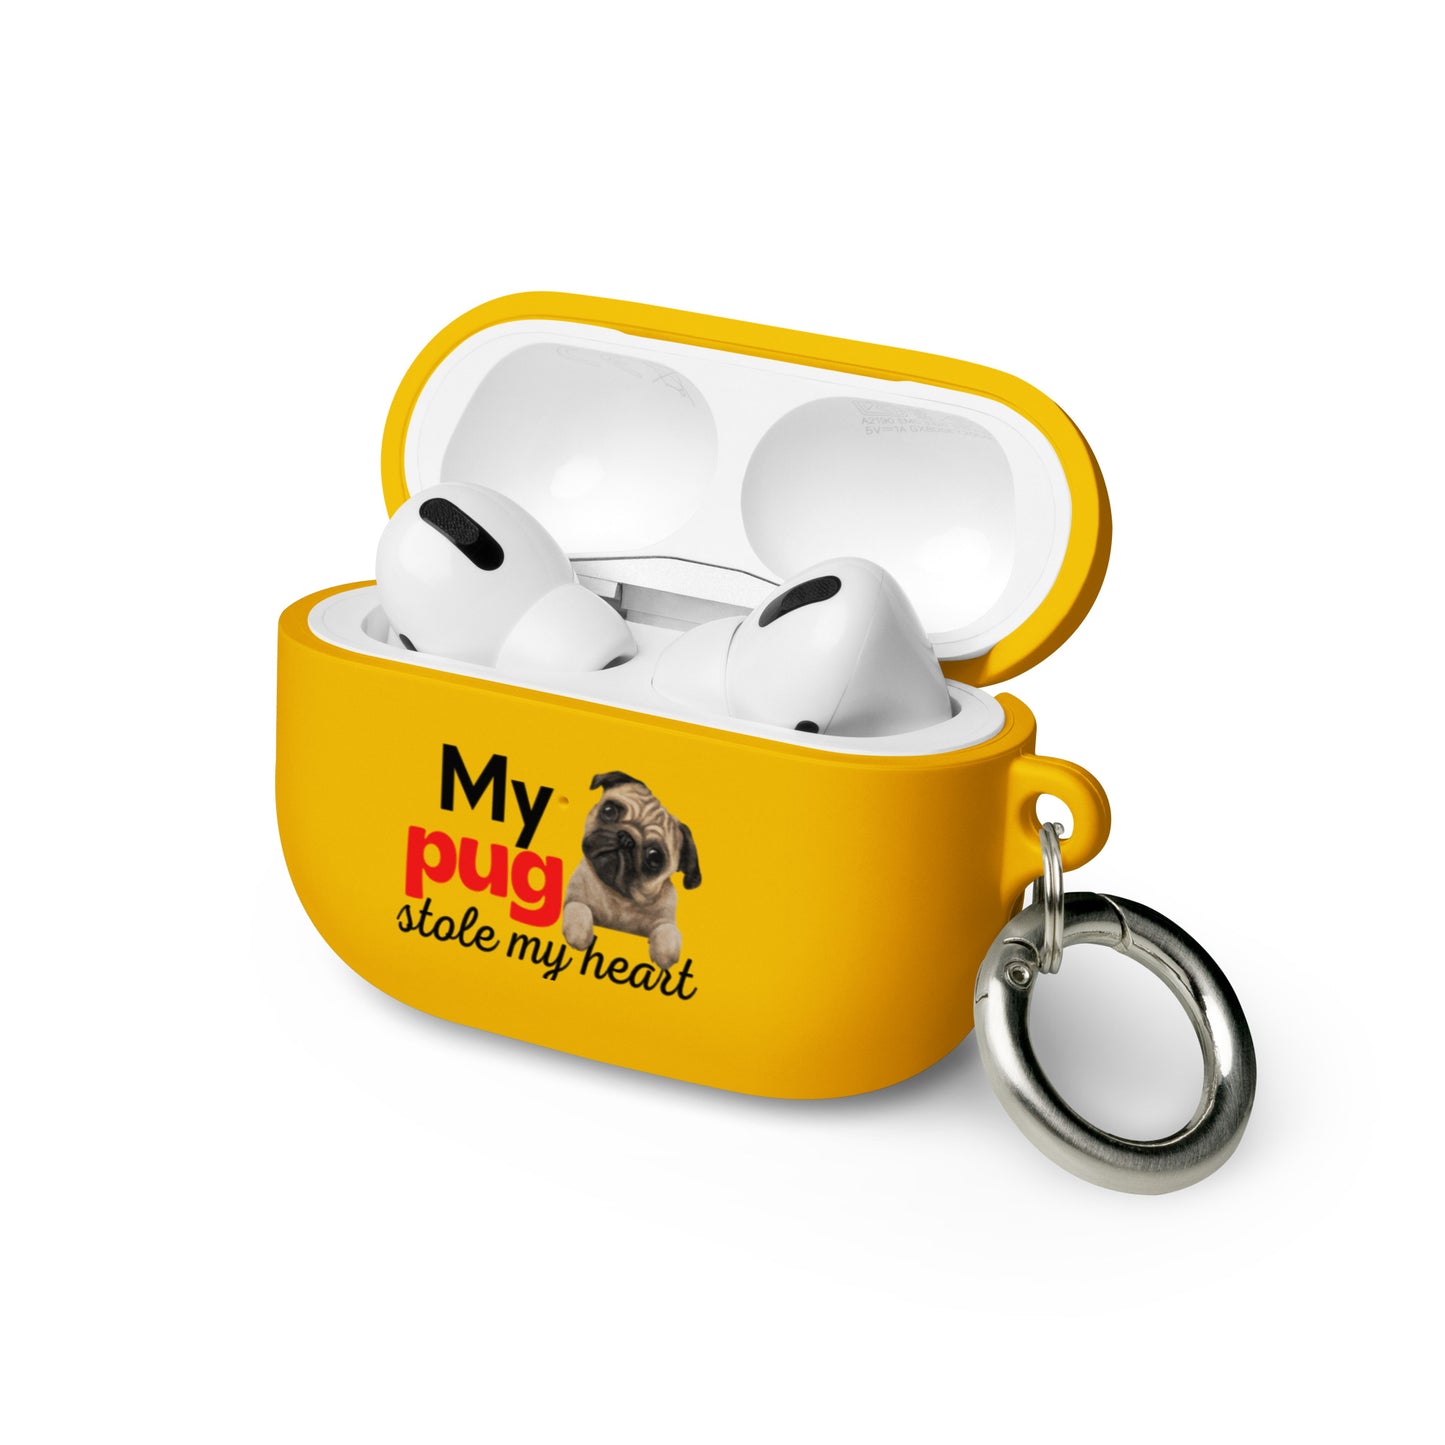 AirPods case 'My Pug stole my heart'